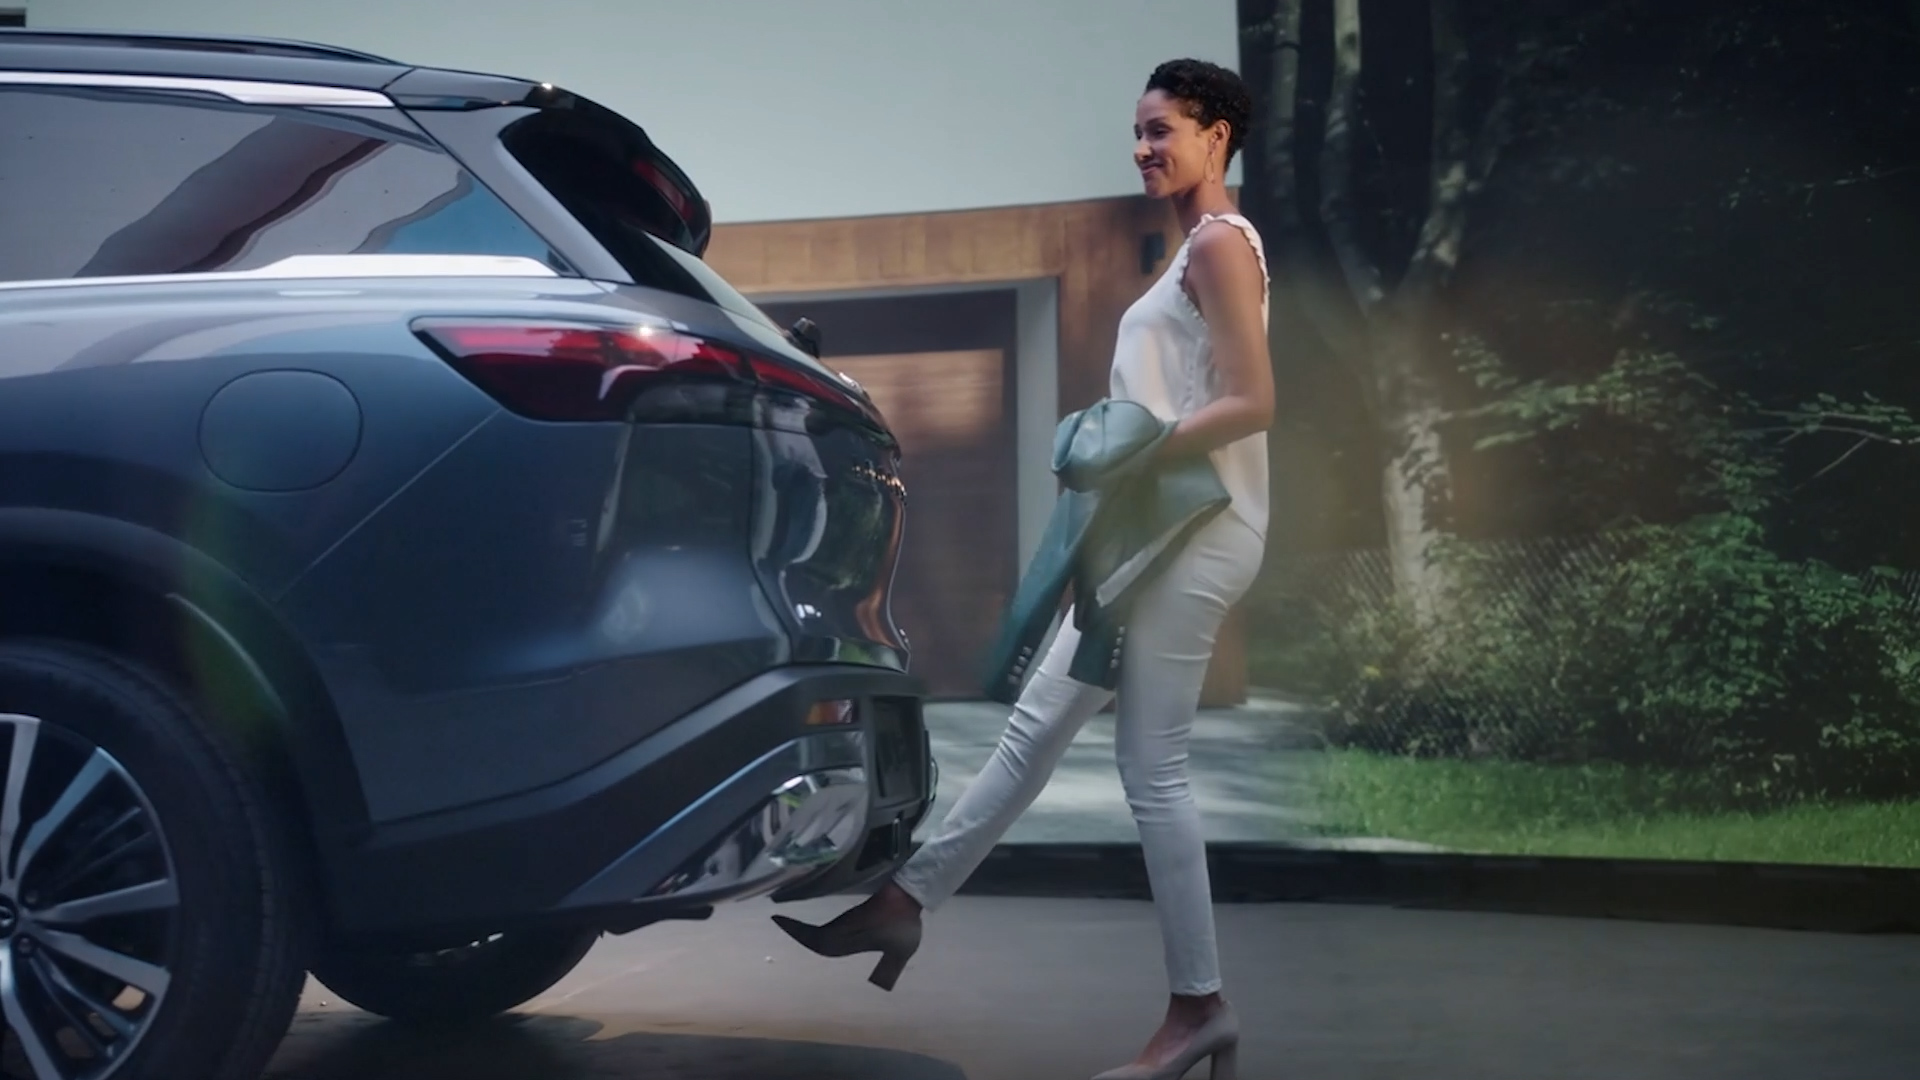 2022 INFINITI QX60 Crossover SUV parked with woman walking behind vehicle